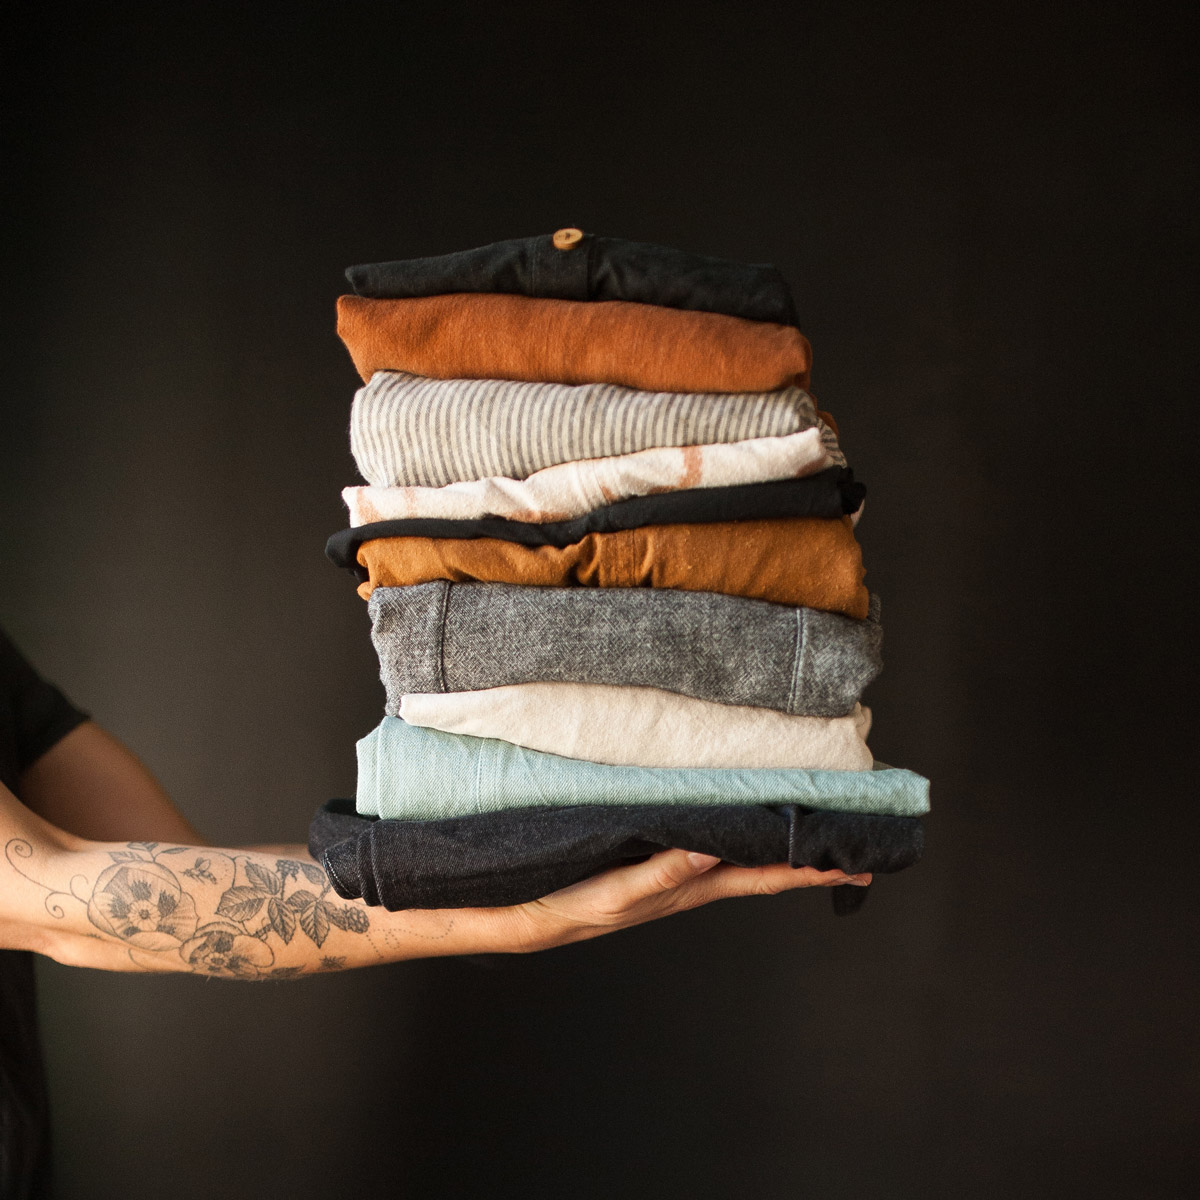 Meg holding a stack of fabric in an oustretched arm.